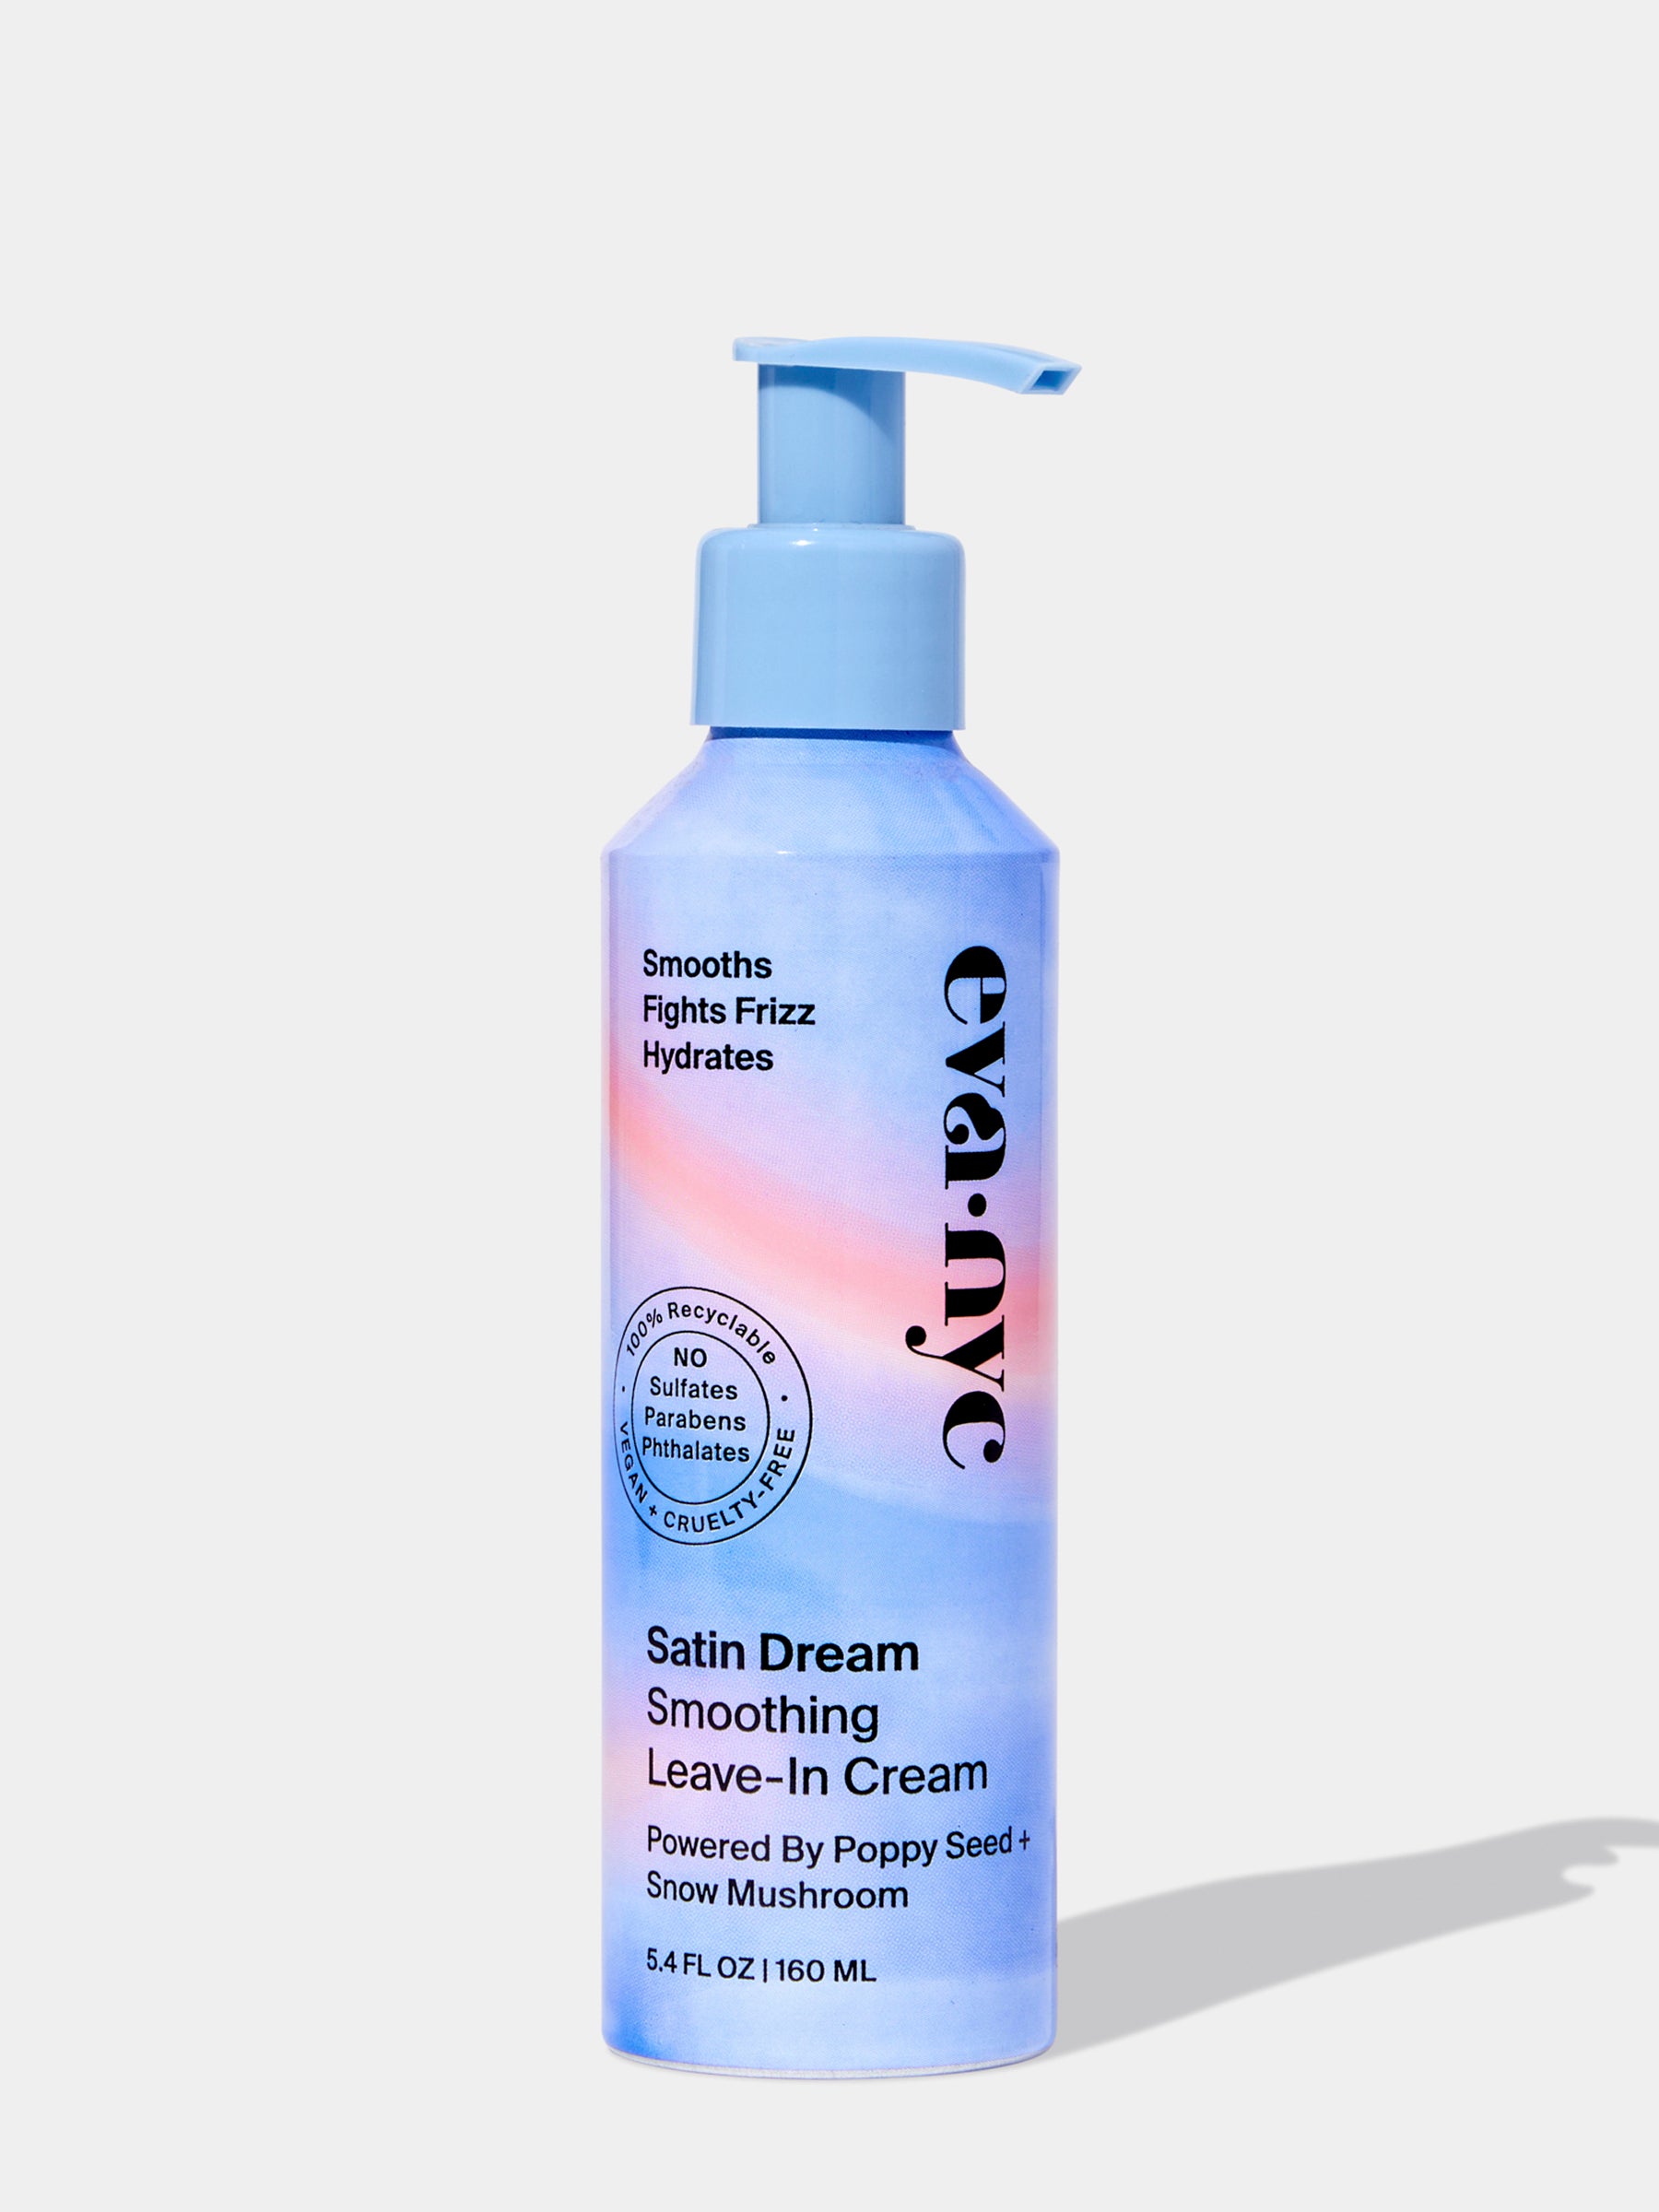 Satin Dream Smoothing Leave-In Hair Cream, Fight Frizz